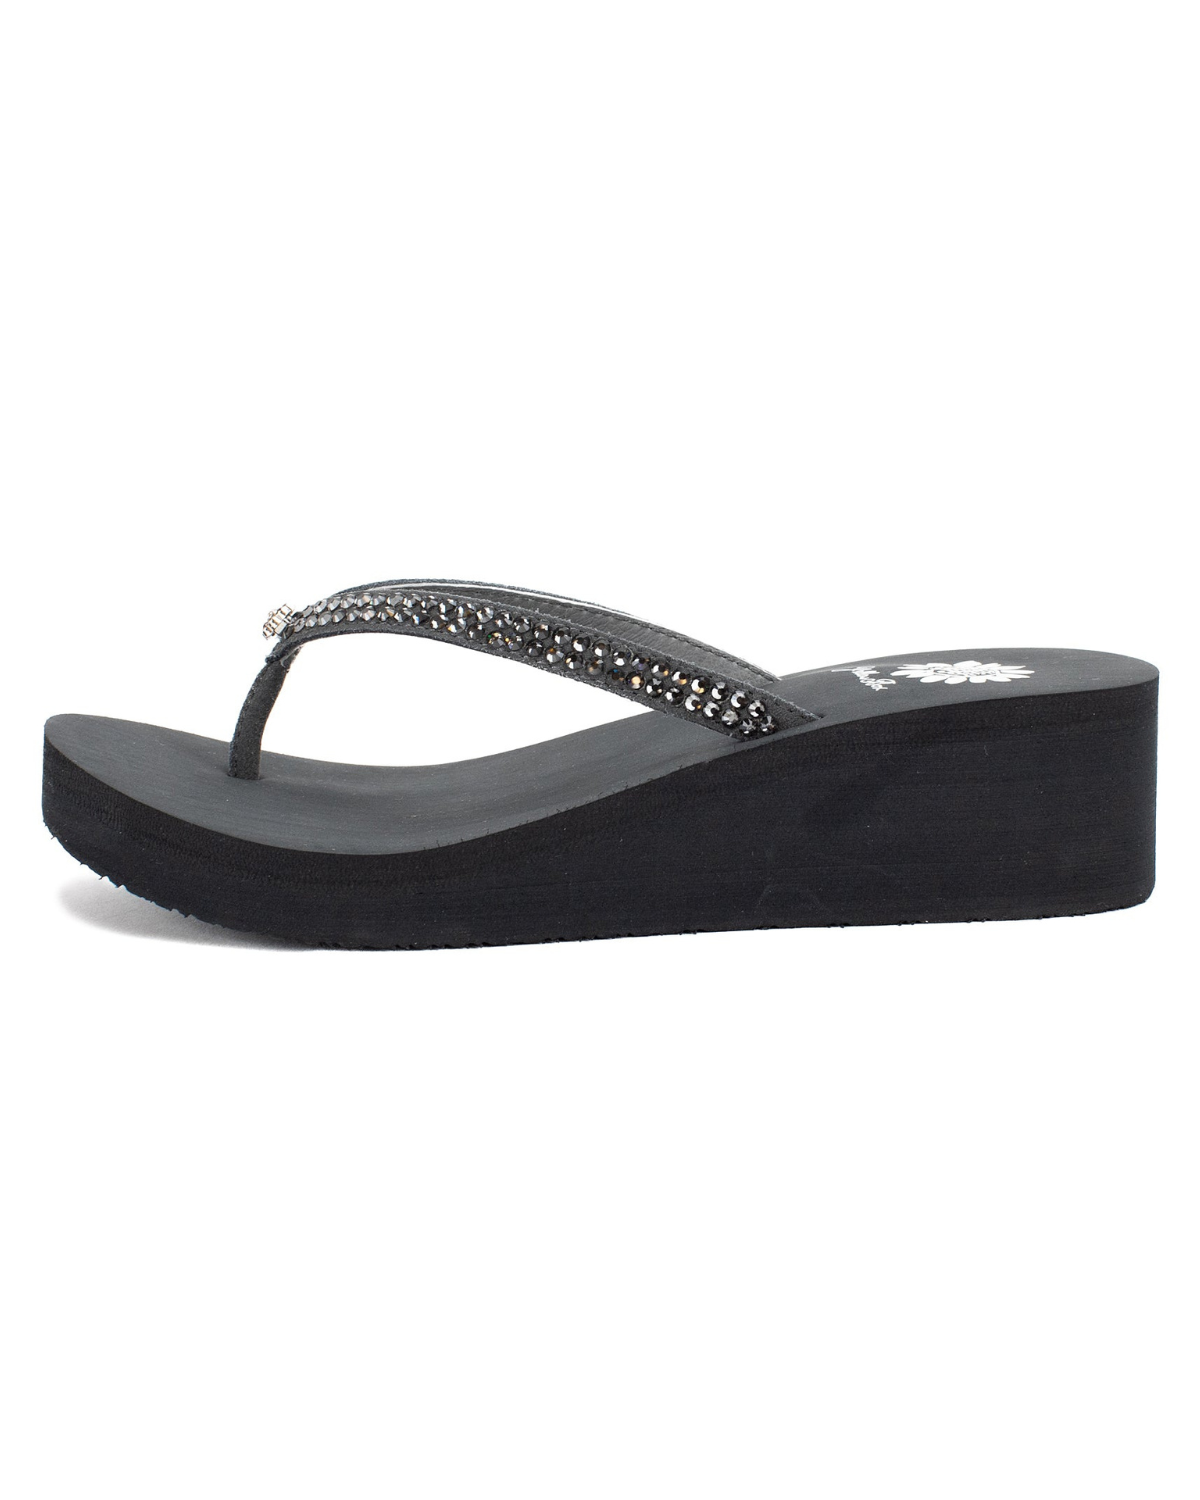 Side view of a black wedge sandal with rhinestones on the strap on a white backdrop. The sandal has 1.75" heel height and 0.75" platform height.